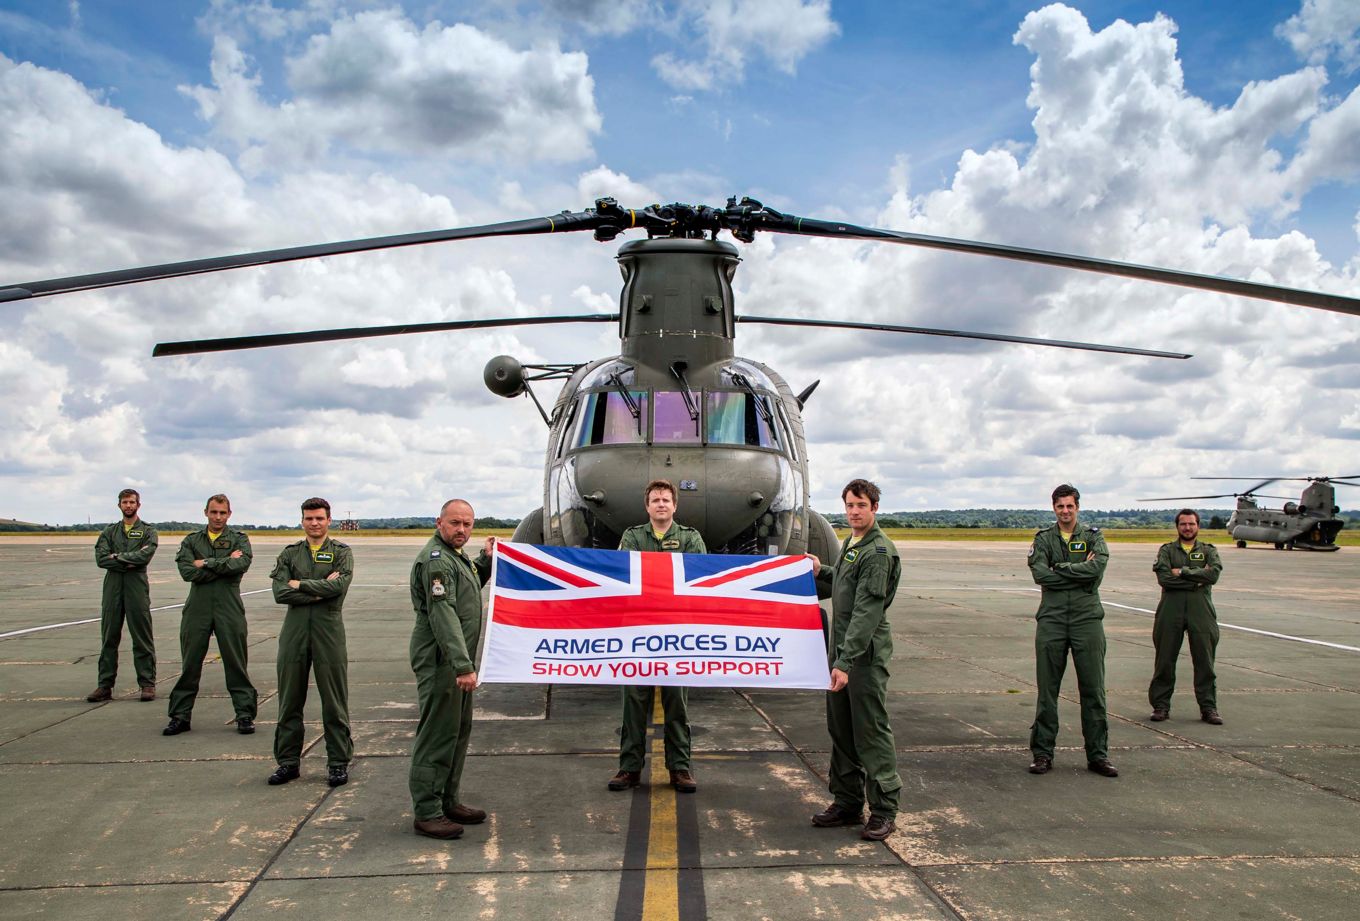 Image shows RAF personnel holding an Armed Forces Day flag standing in front of an RAF Chinook helicopter.